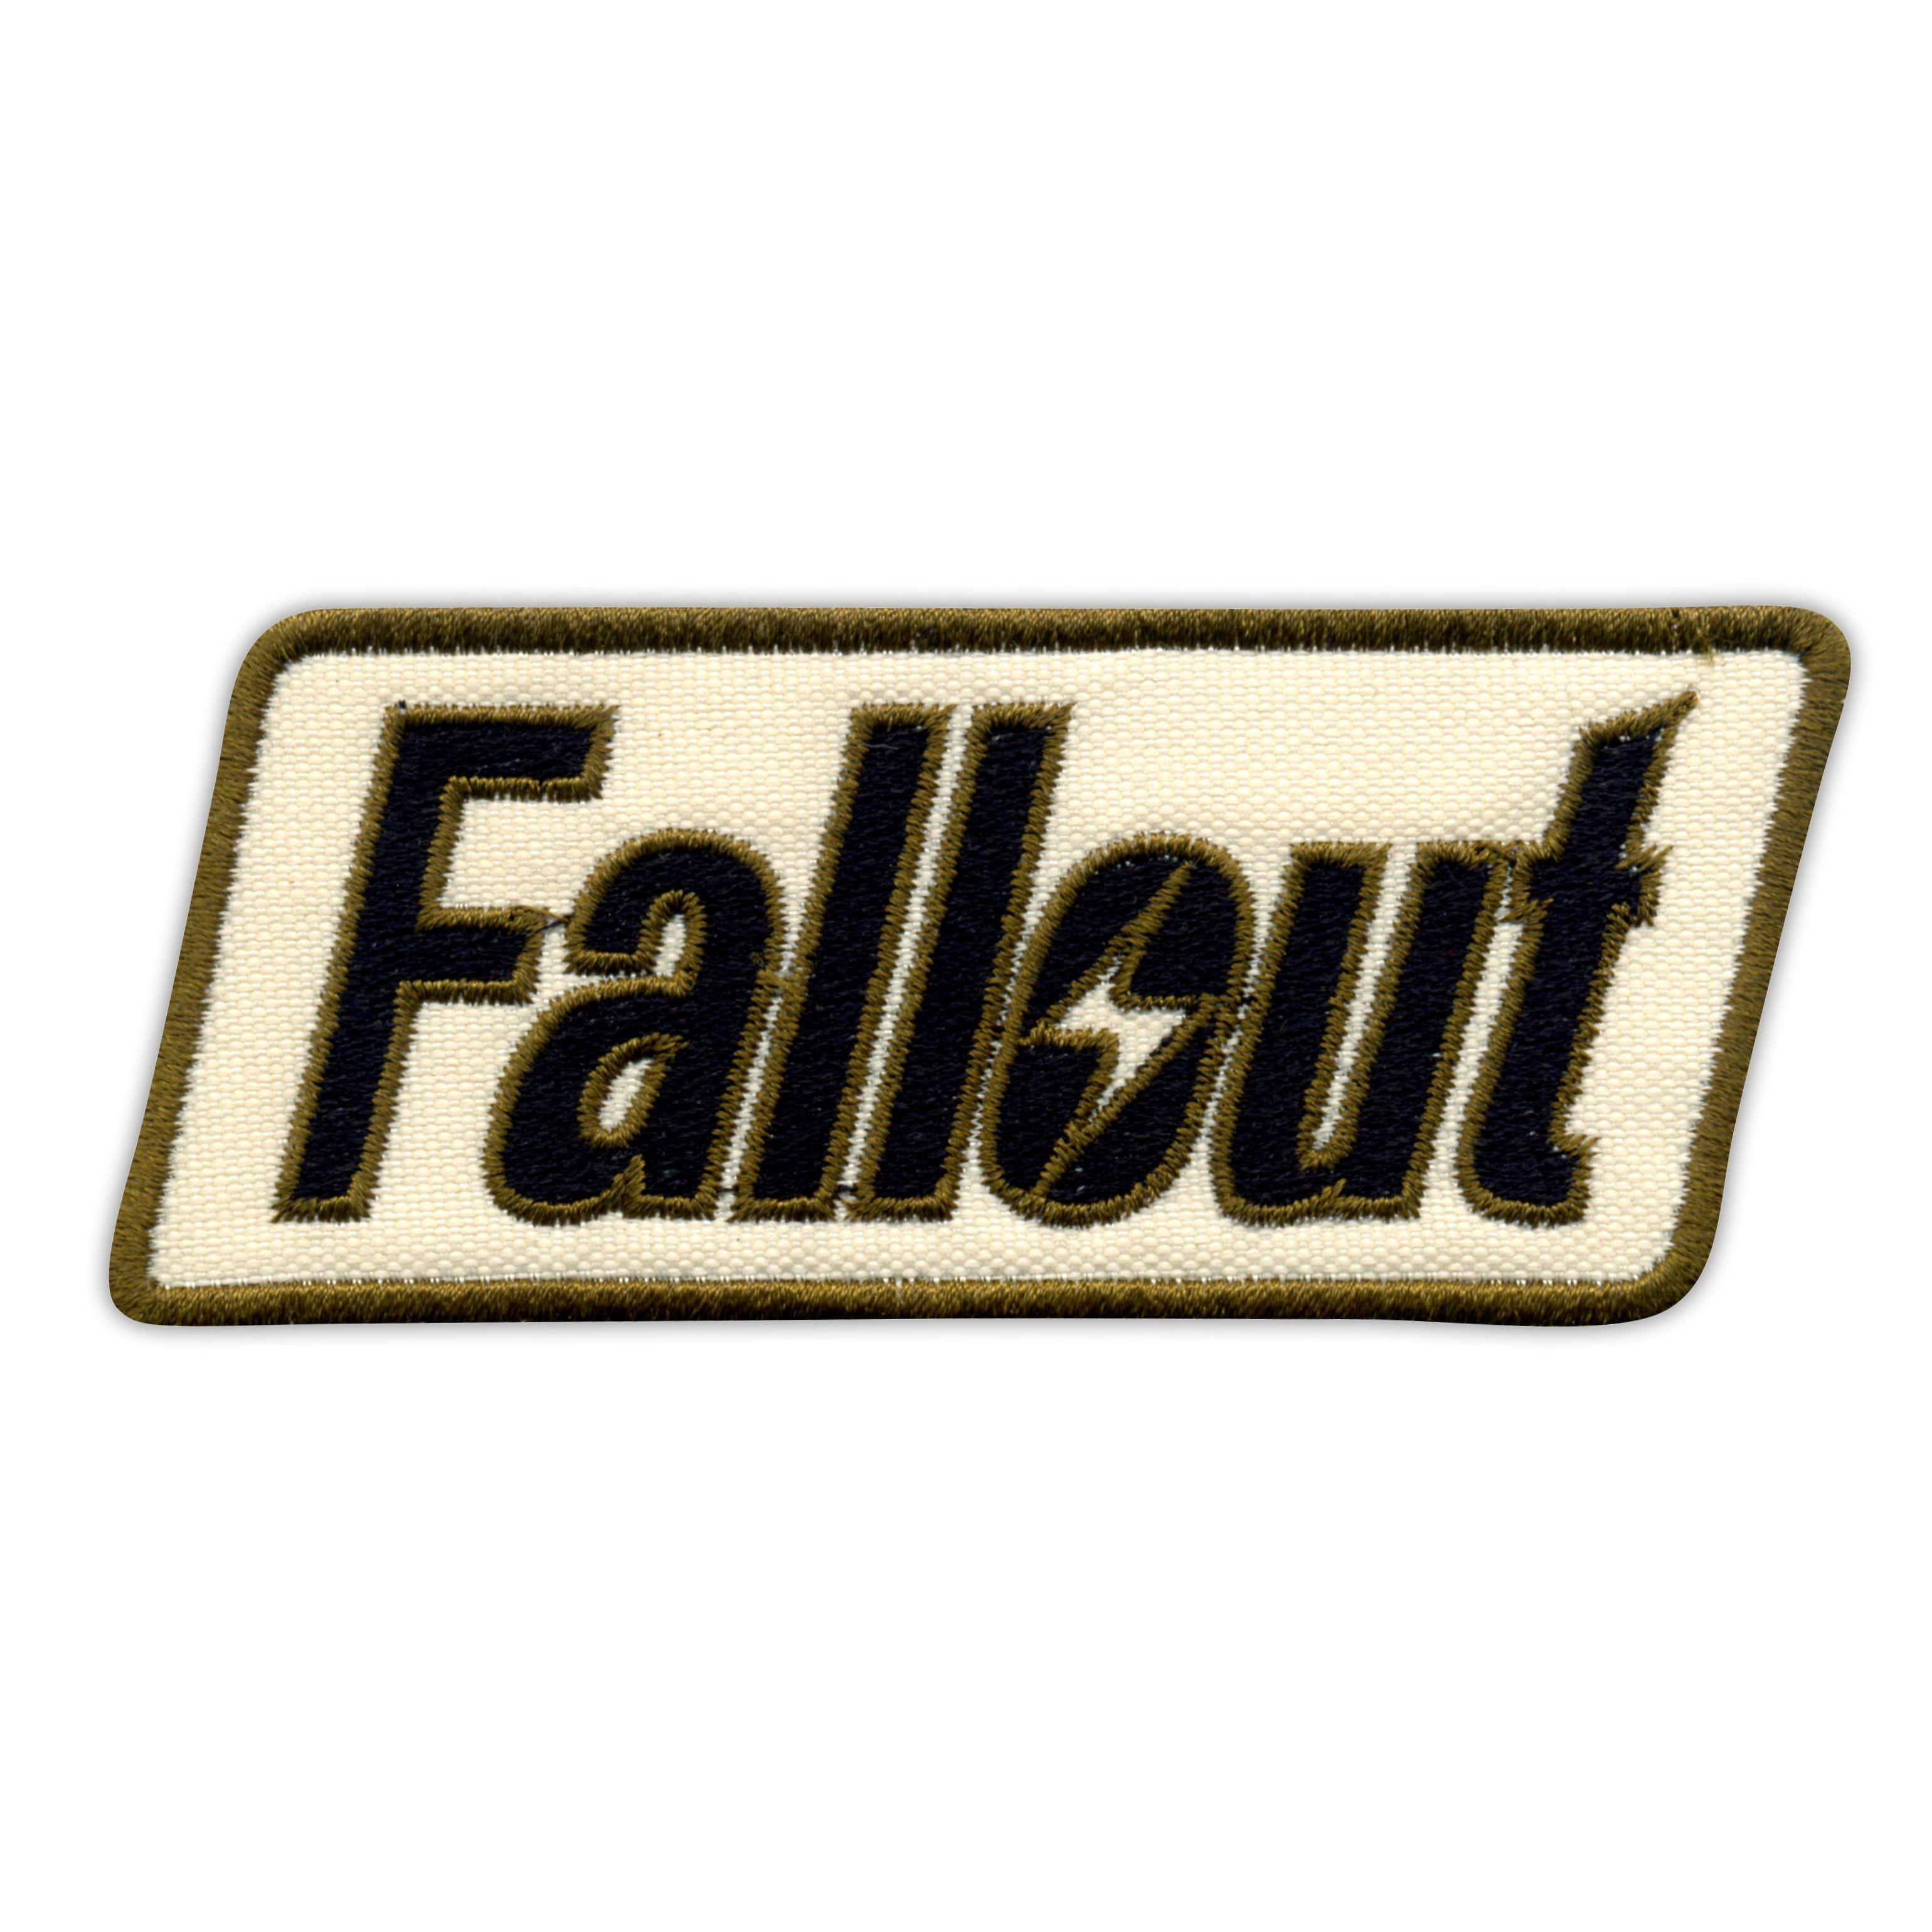 Fallout Logo - Fallout - logo Embroidered Patch/Badge